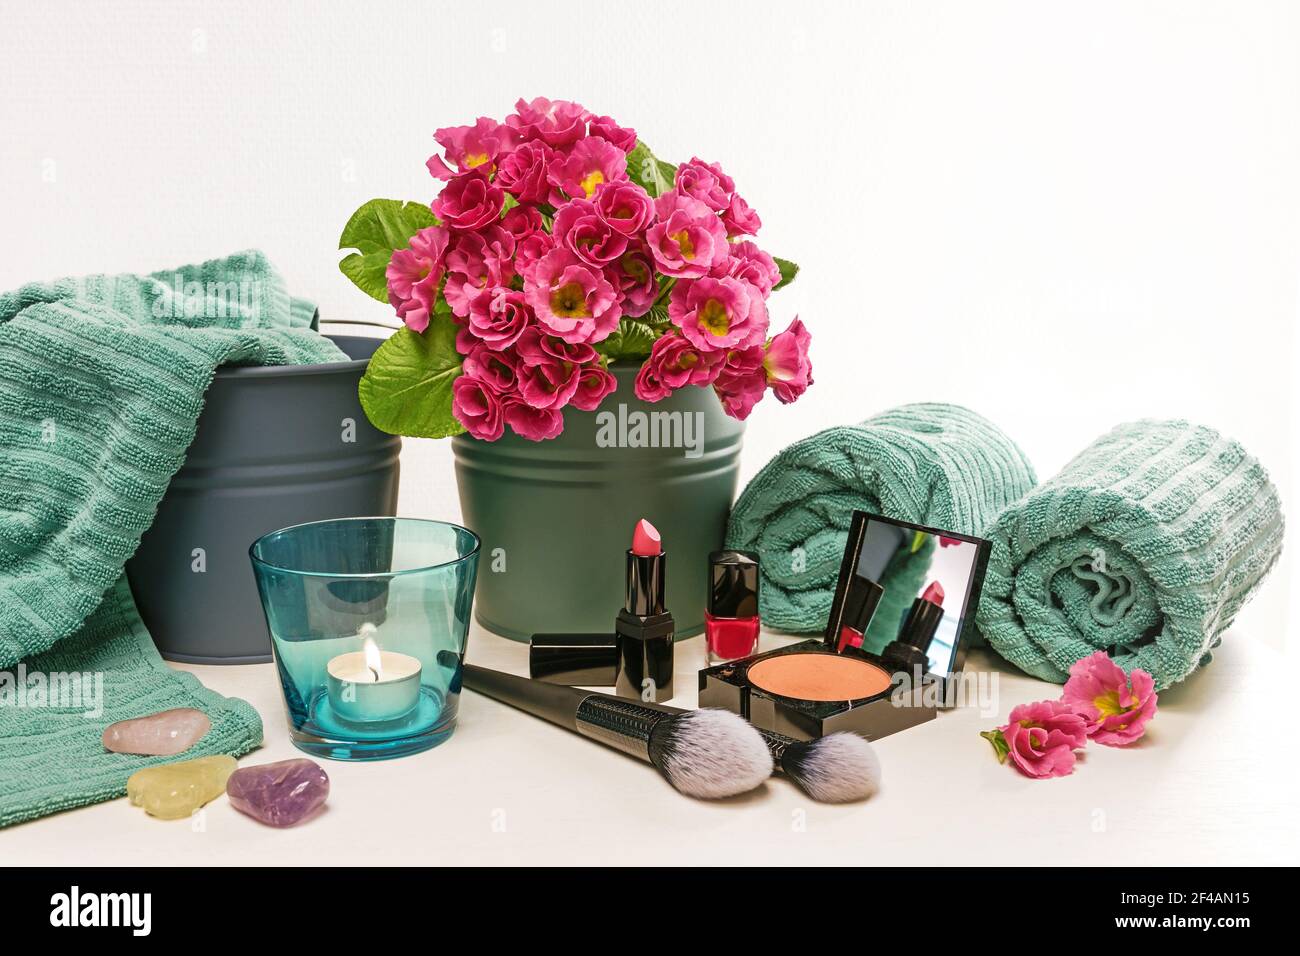 Arrangement of beauty and make-up utensils like lipstick, nail polish and face powder with cosmetic brushes, turquoise towels, candle and pink flowers Stock Photo